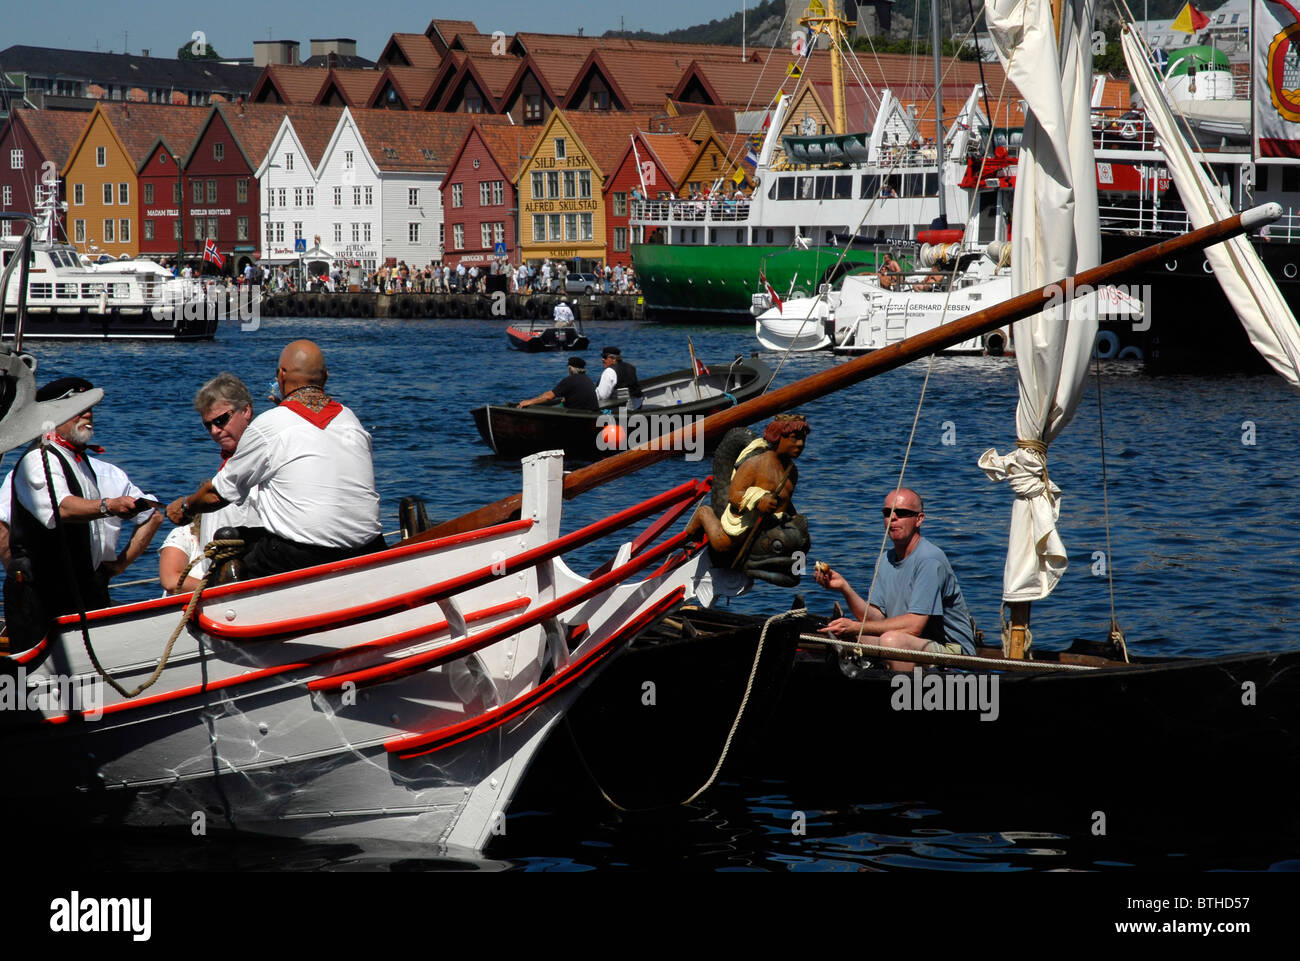 The Farmer Day Celebration, Vagen, Old Harbour, Bergen, Norway. Stock Photo